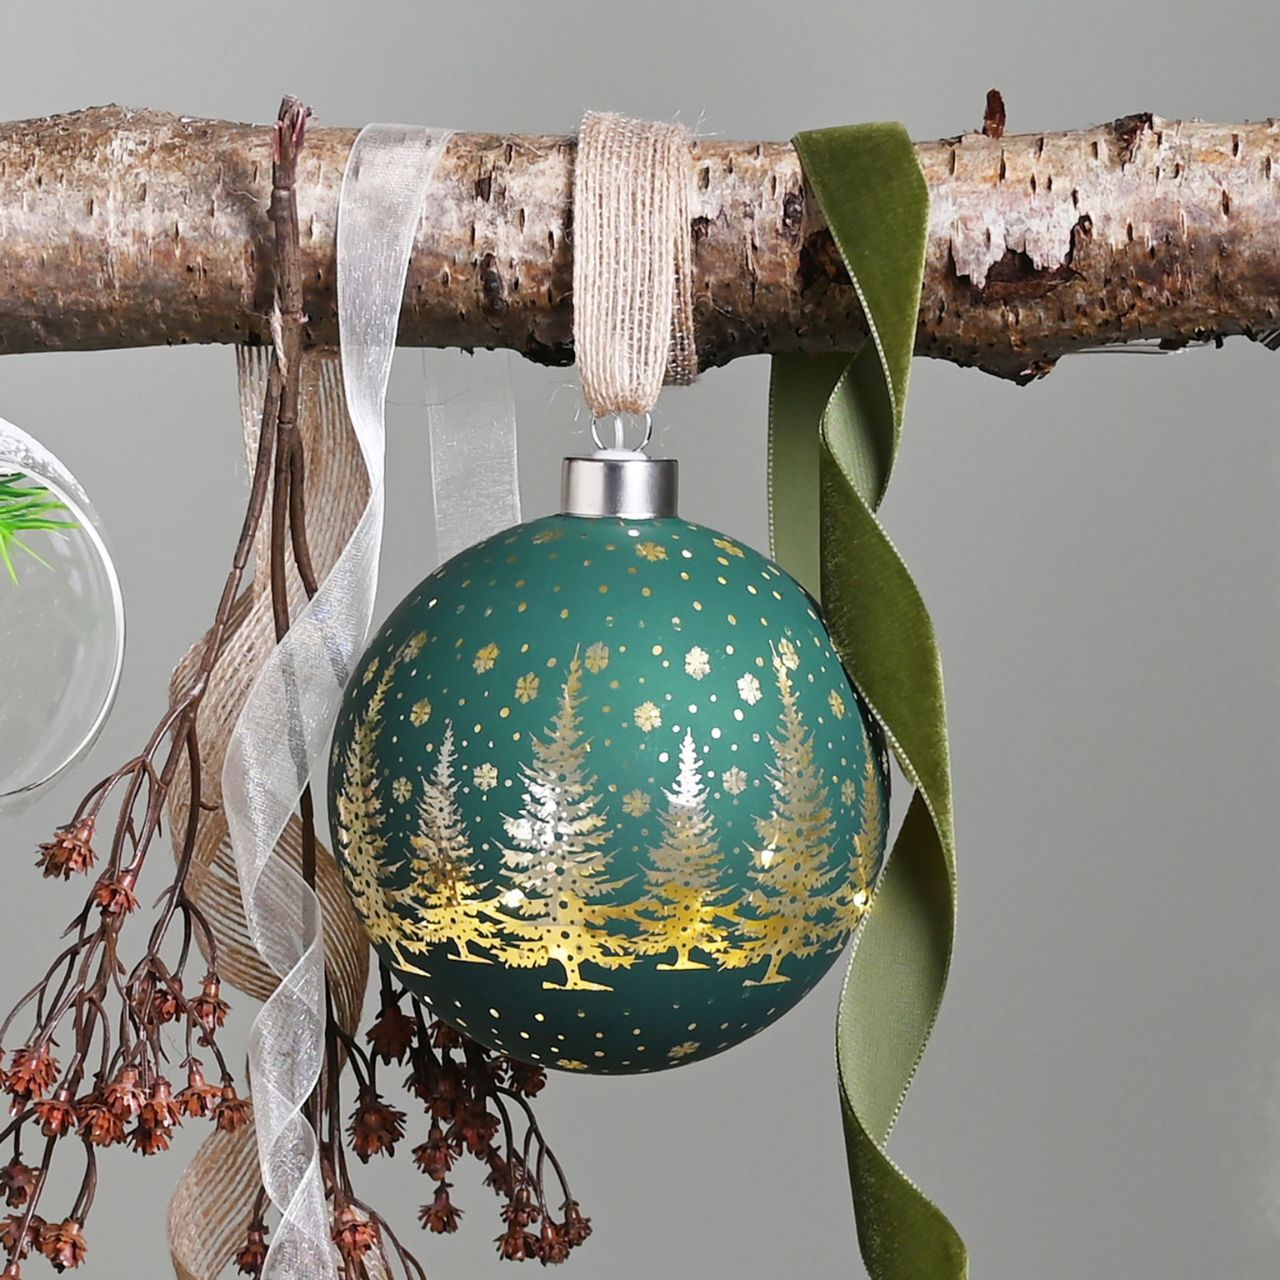 Winter Wilds Medium LED Hanging Glass Light Christmas Decoration  A Winter Wilds LED hanging glass light decoration.  This illuminating decoration is a delightful twist on the traditional this Christmas.